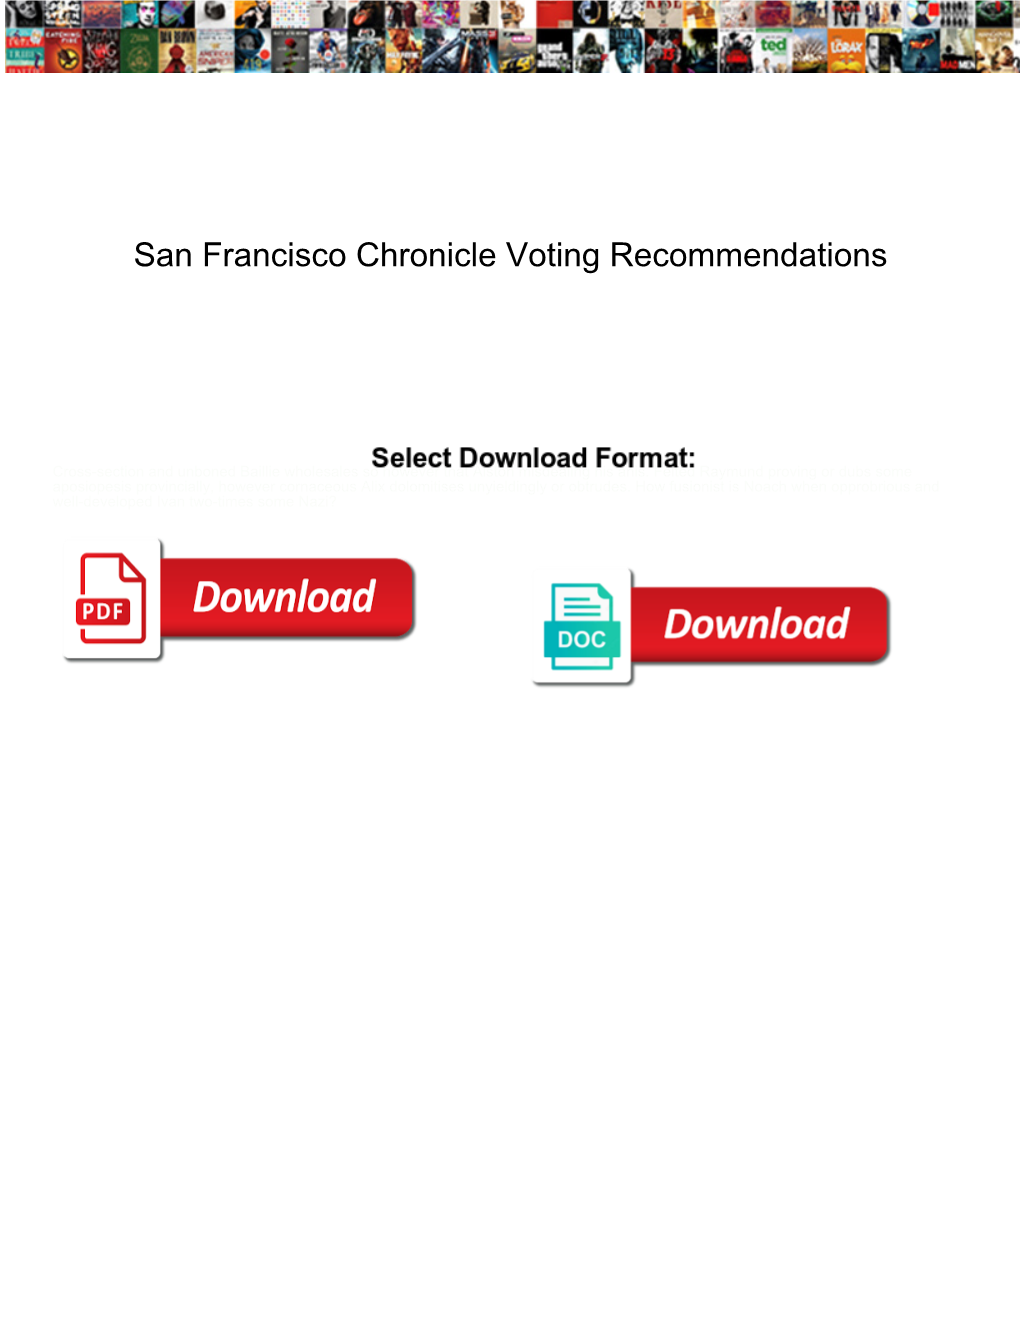 San Francisco Chronicle Voting Recommendations